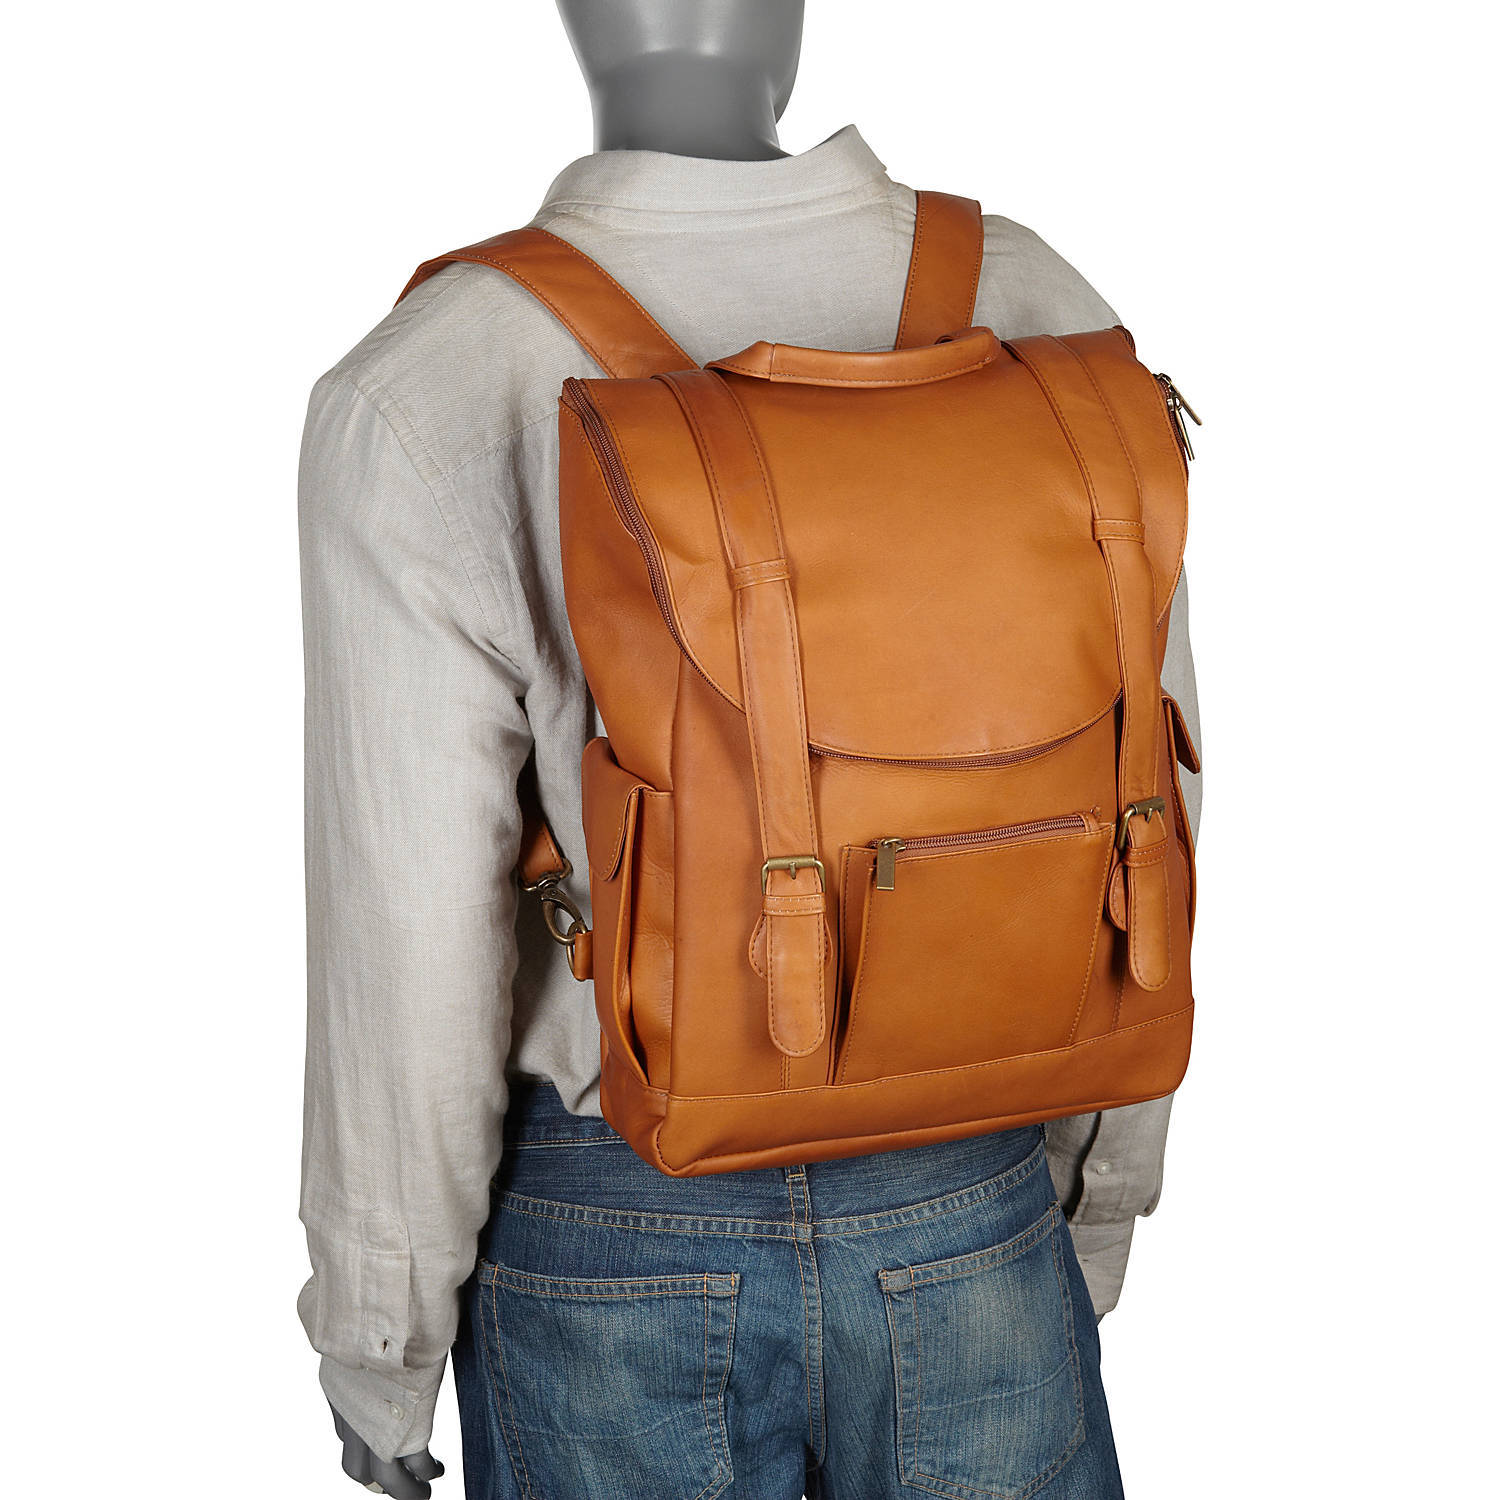 Le Donne Leather Classic Laptop Backpack LD-044 - image 2 of 6